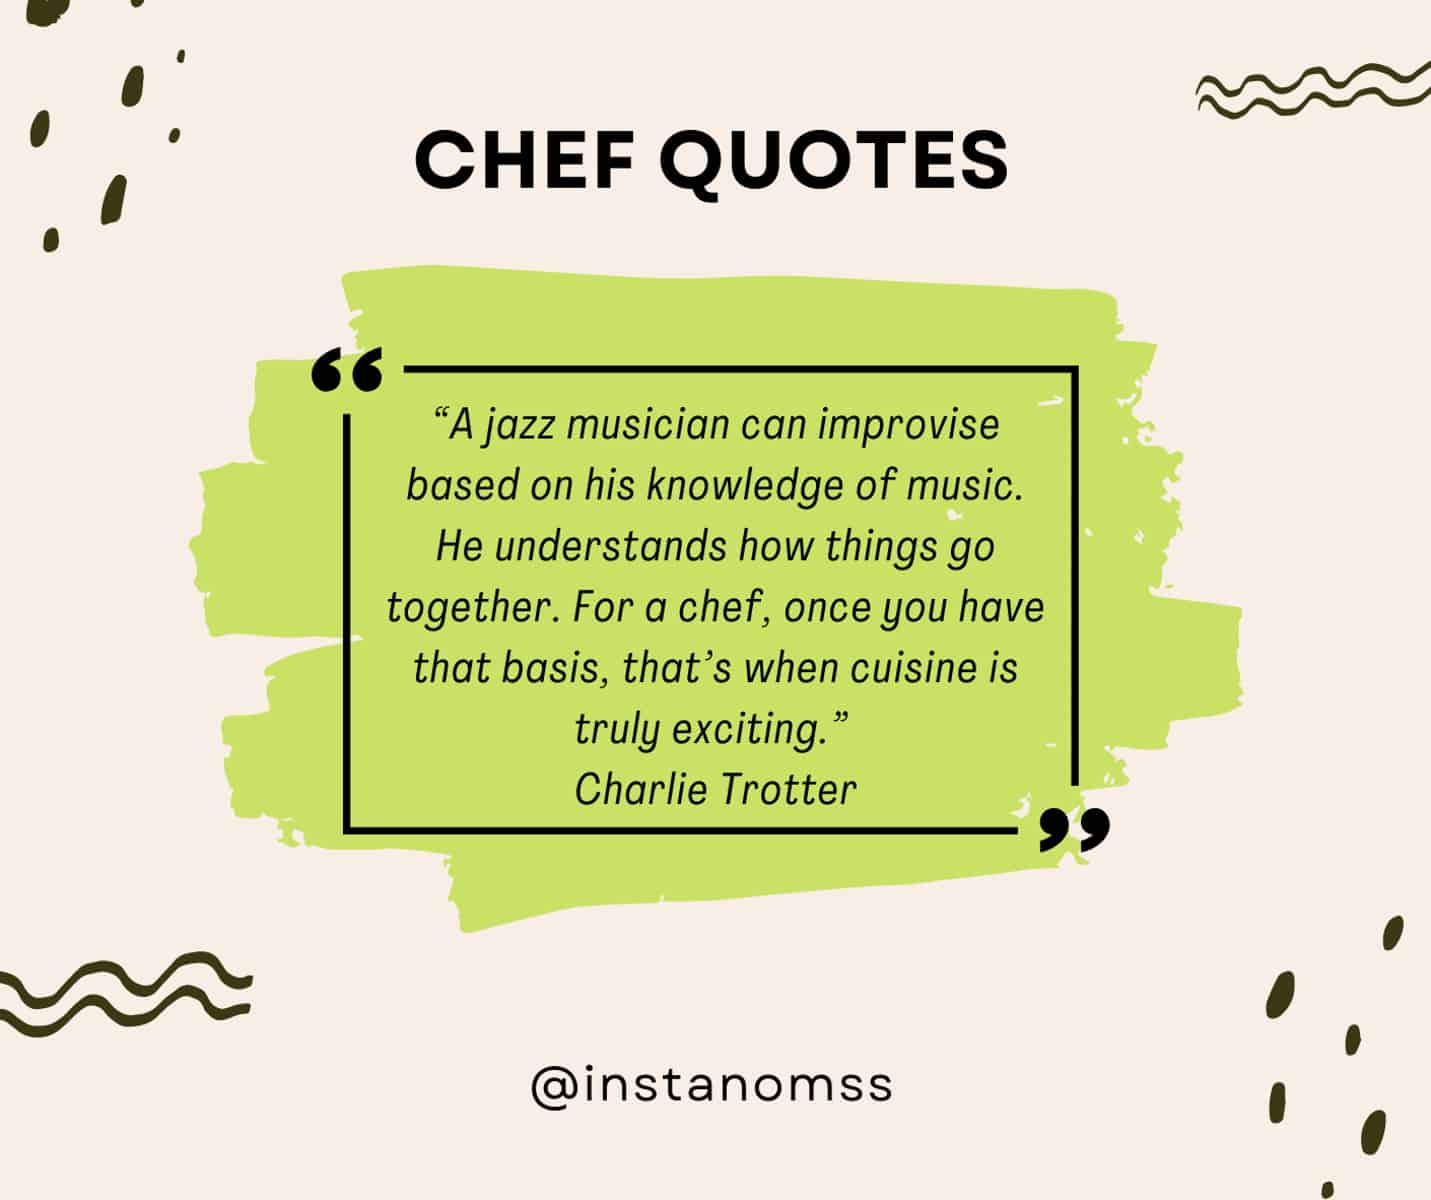 “A jazz musician can improvise based on his knowledge of music. He understands how things go together. For a chef, once you have that basis, that’s when cuisine is truly exciting.” Charlie Trotter